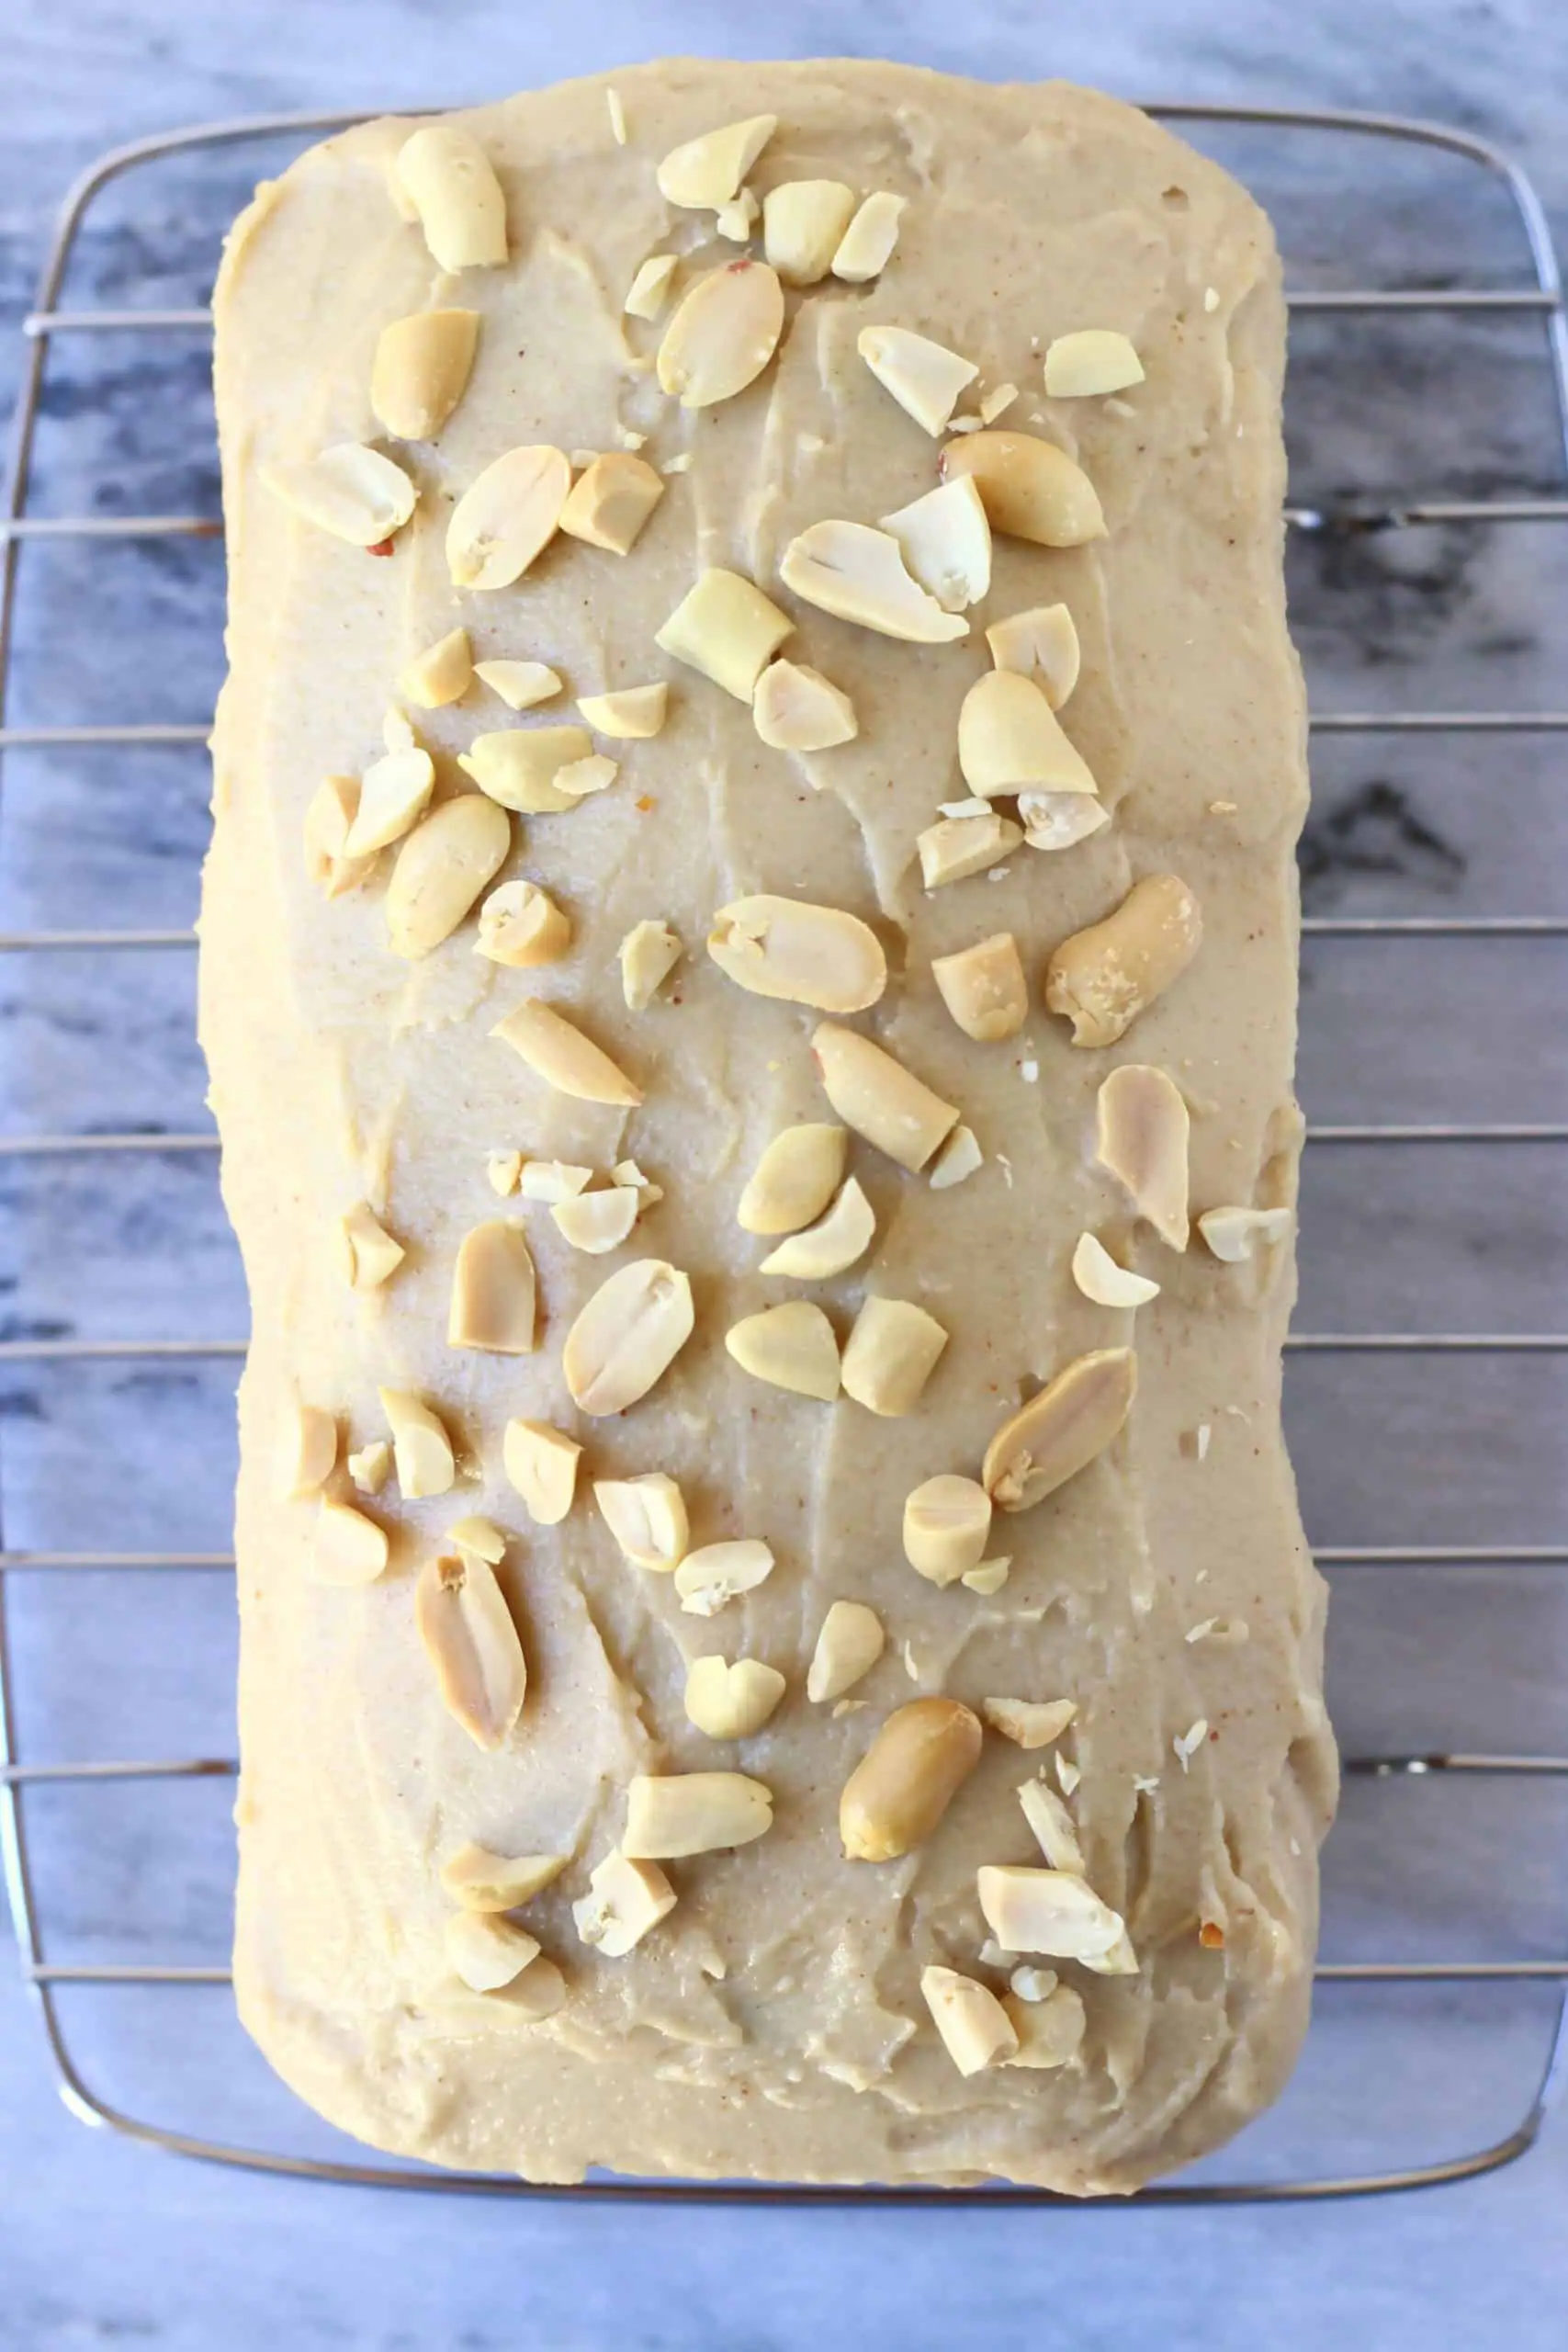 Peanut butter frosting spread over a loaf of banana bread with chopped peanuts on a wire rack